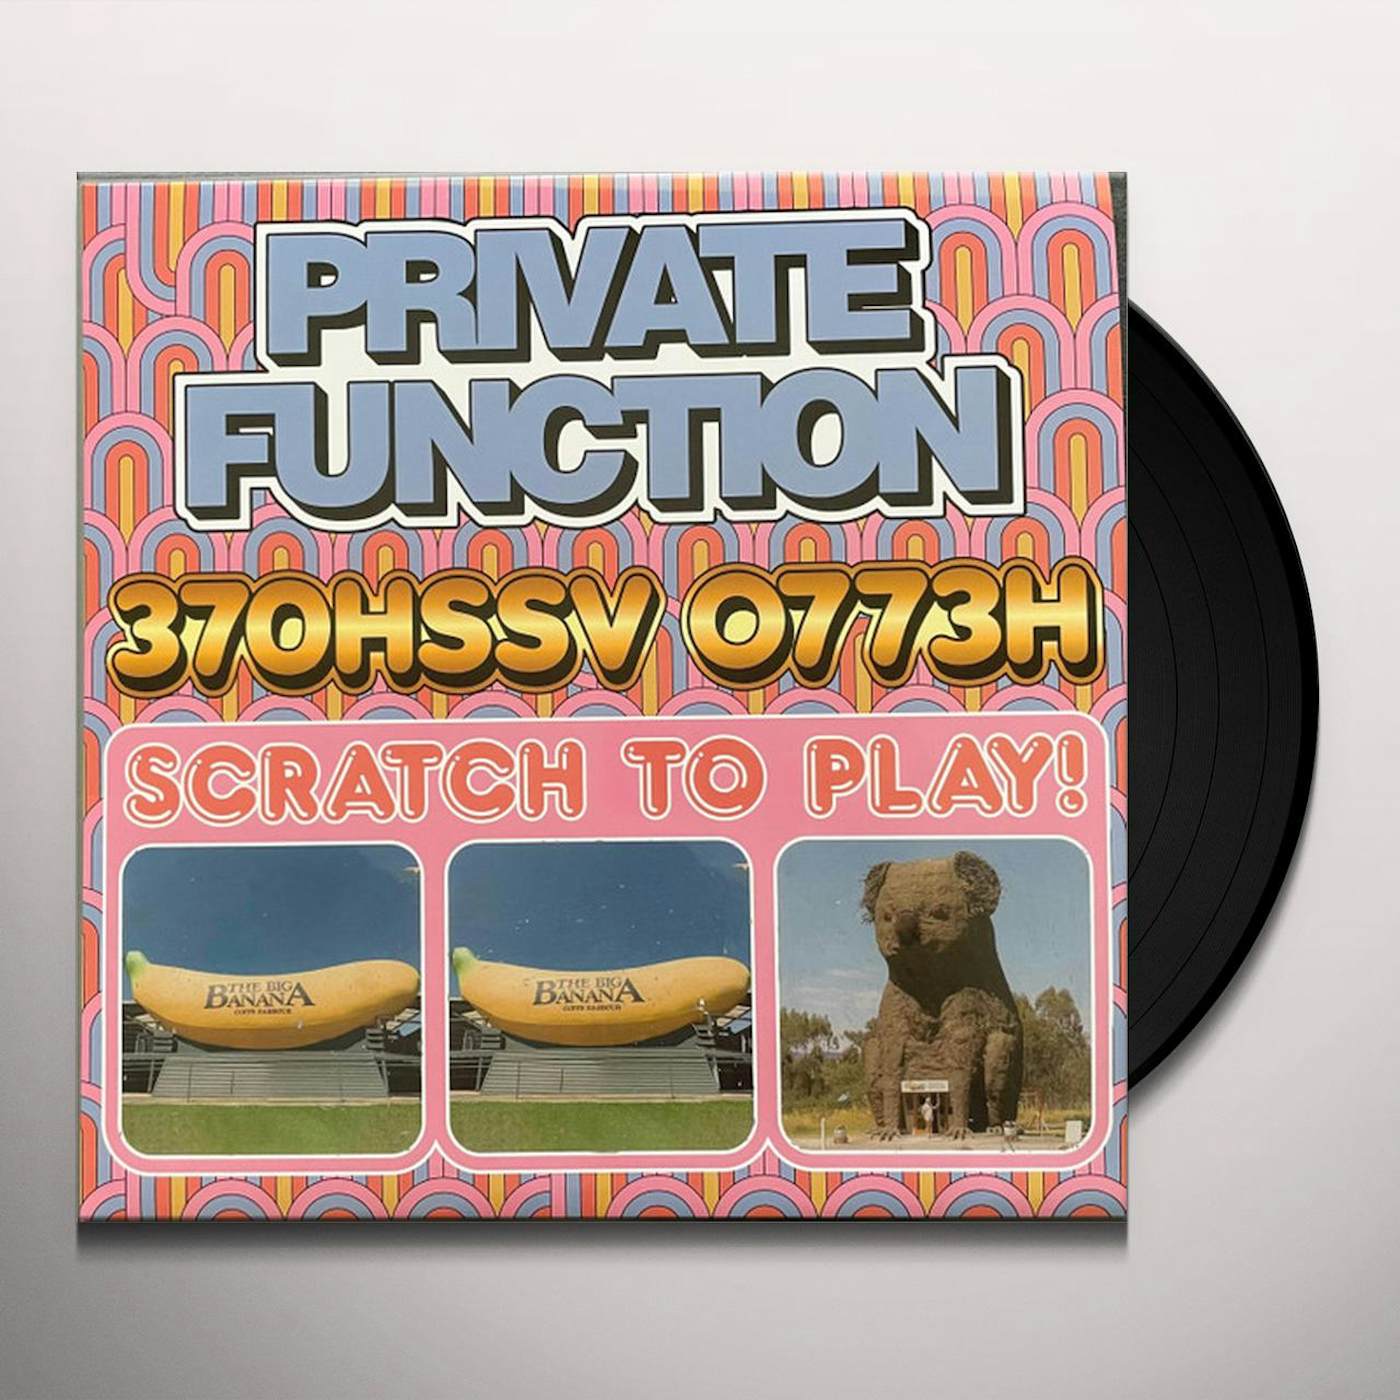 Private Function 370HSSV 0773H Vinyl Record